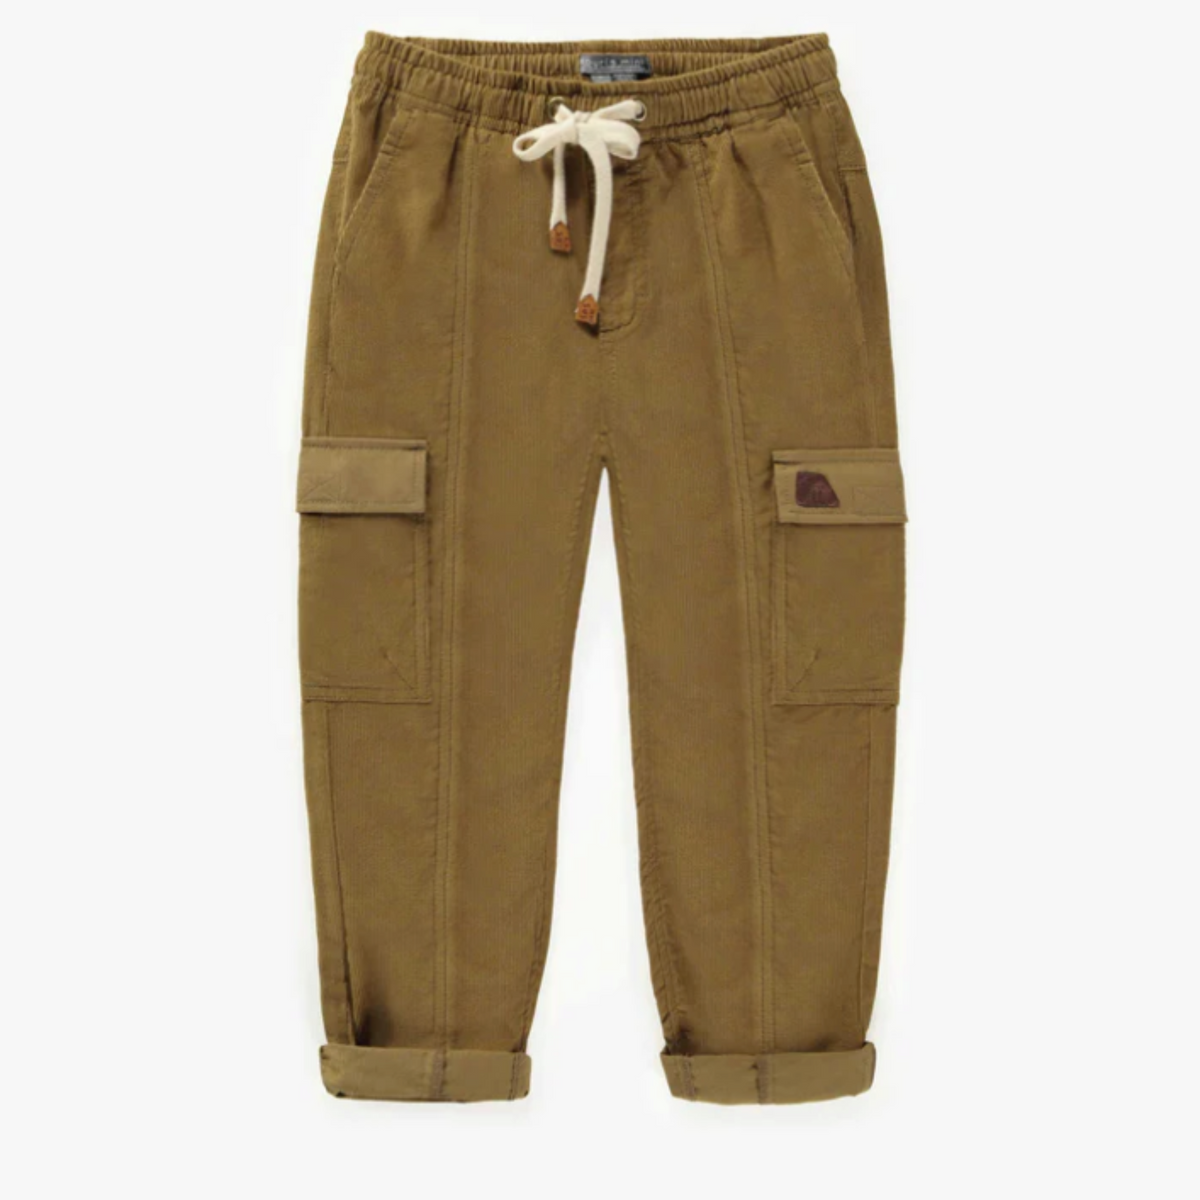 Curry Pants Relaxed Fit in Corduroy, Child